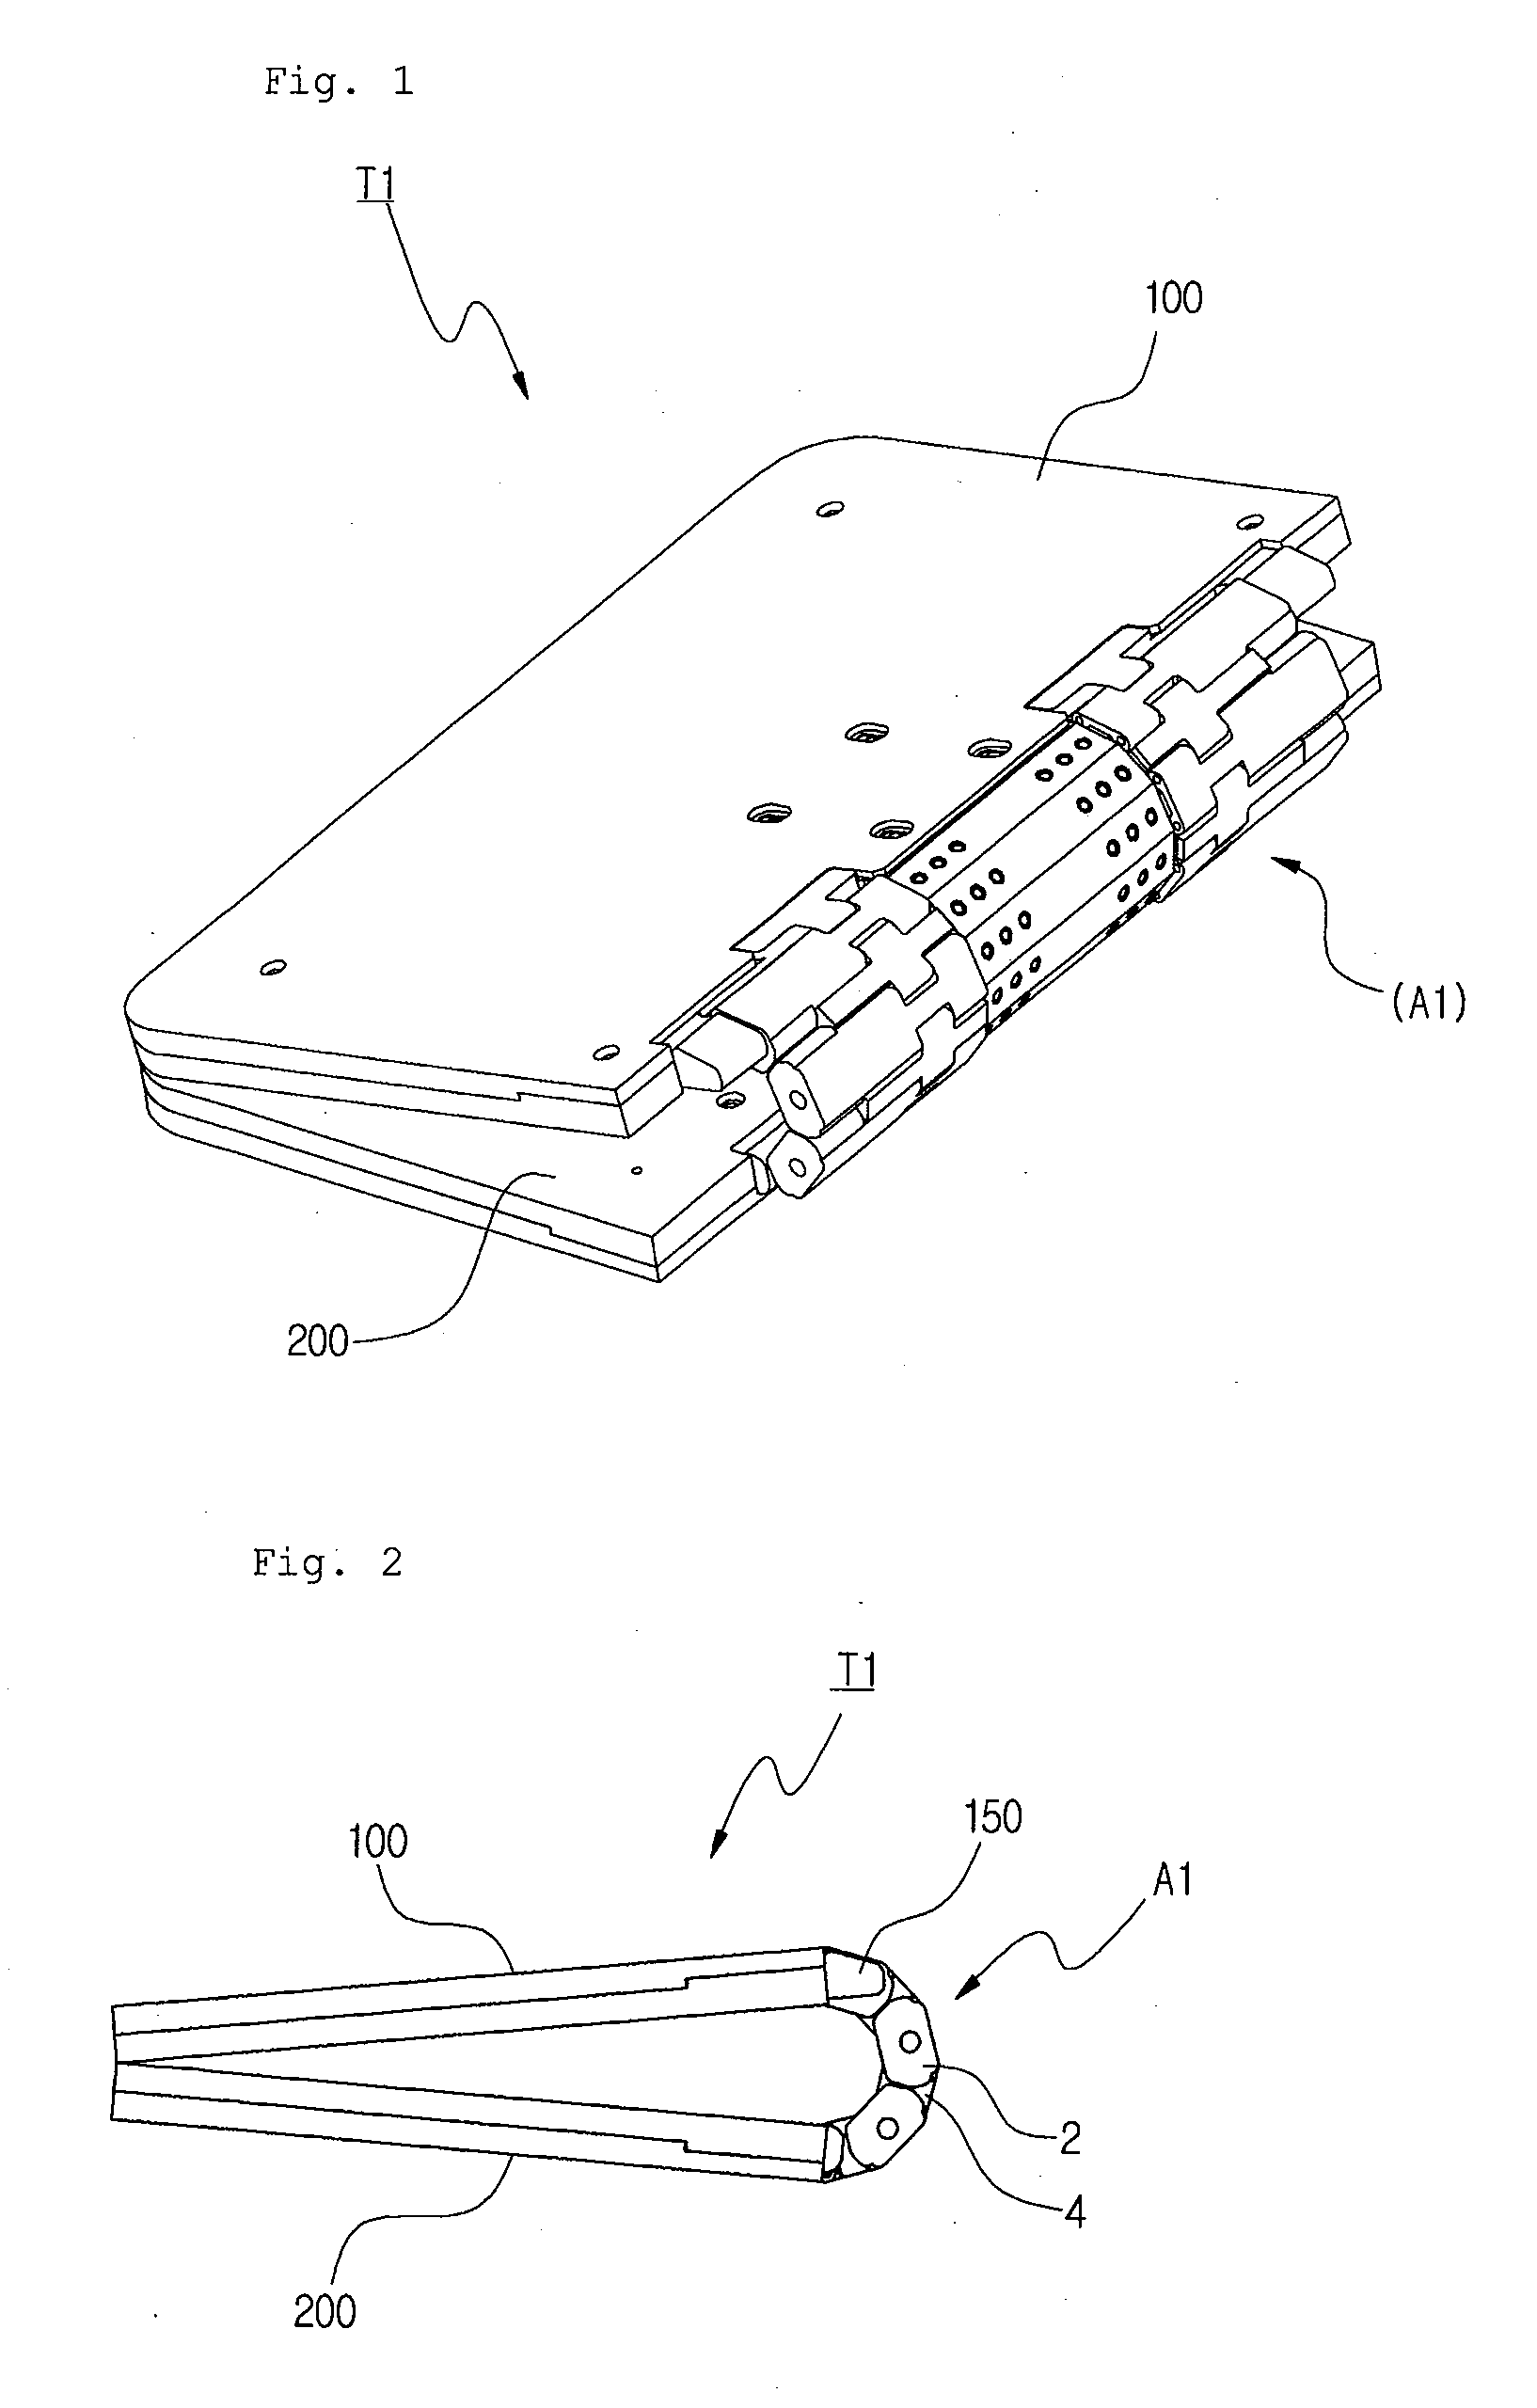 Foldable flexible display device